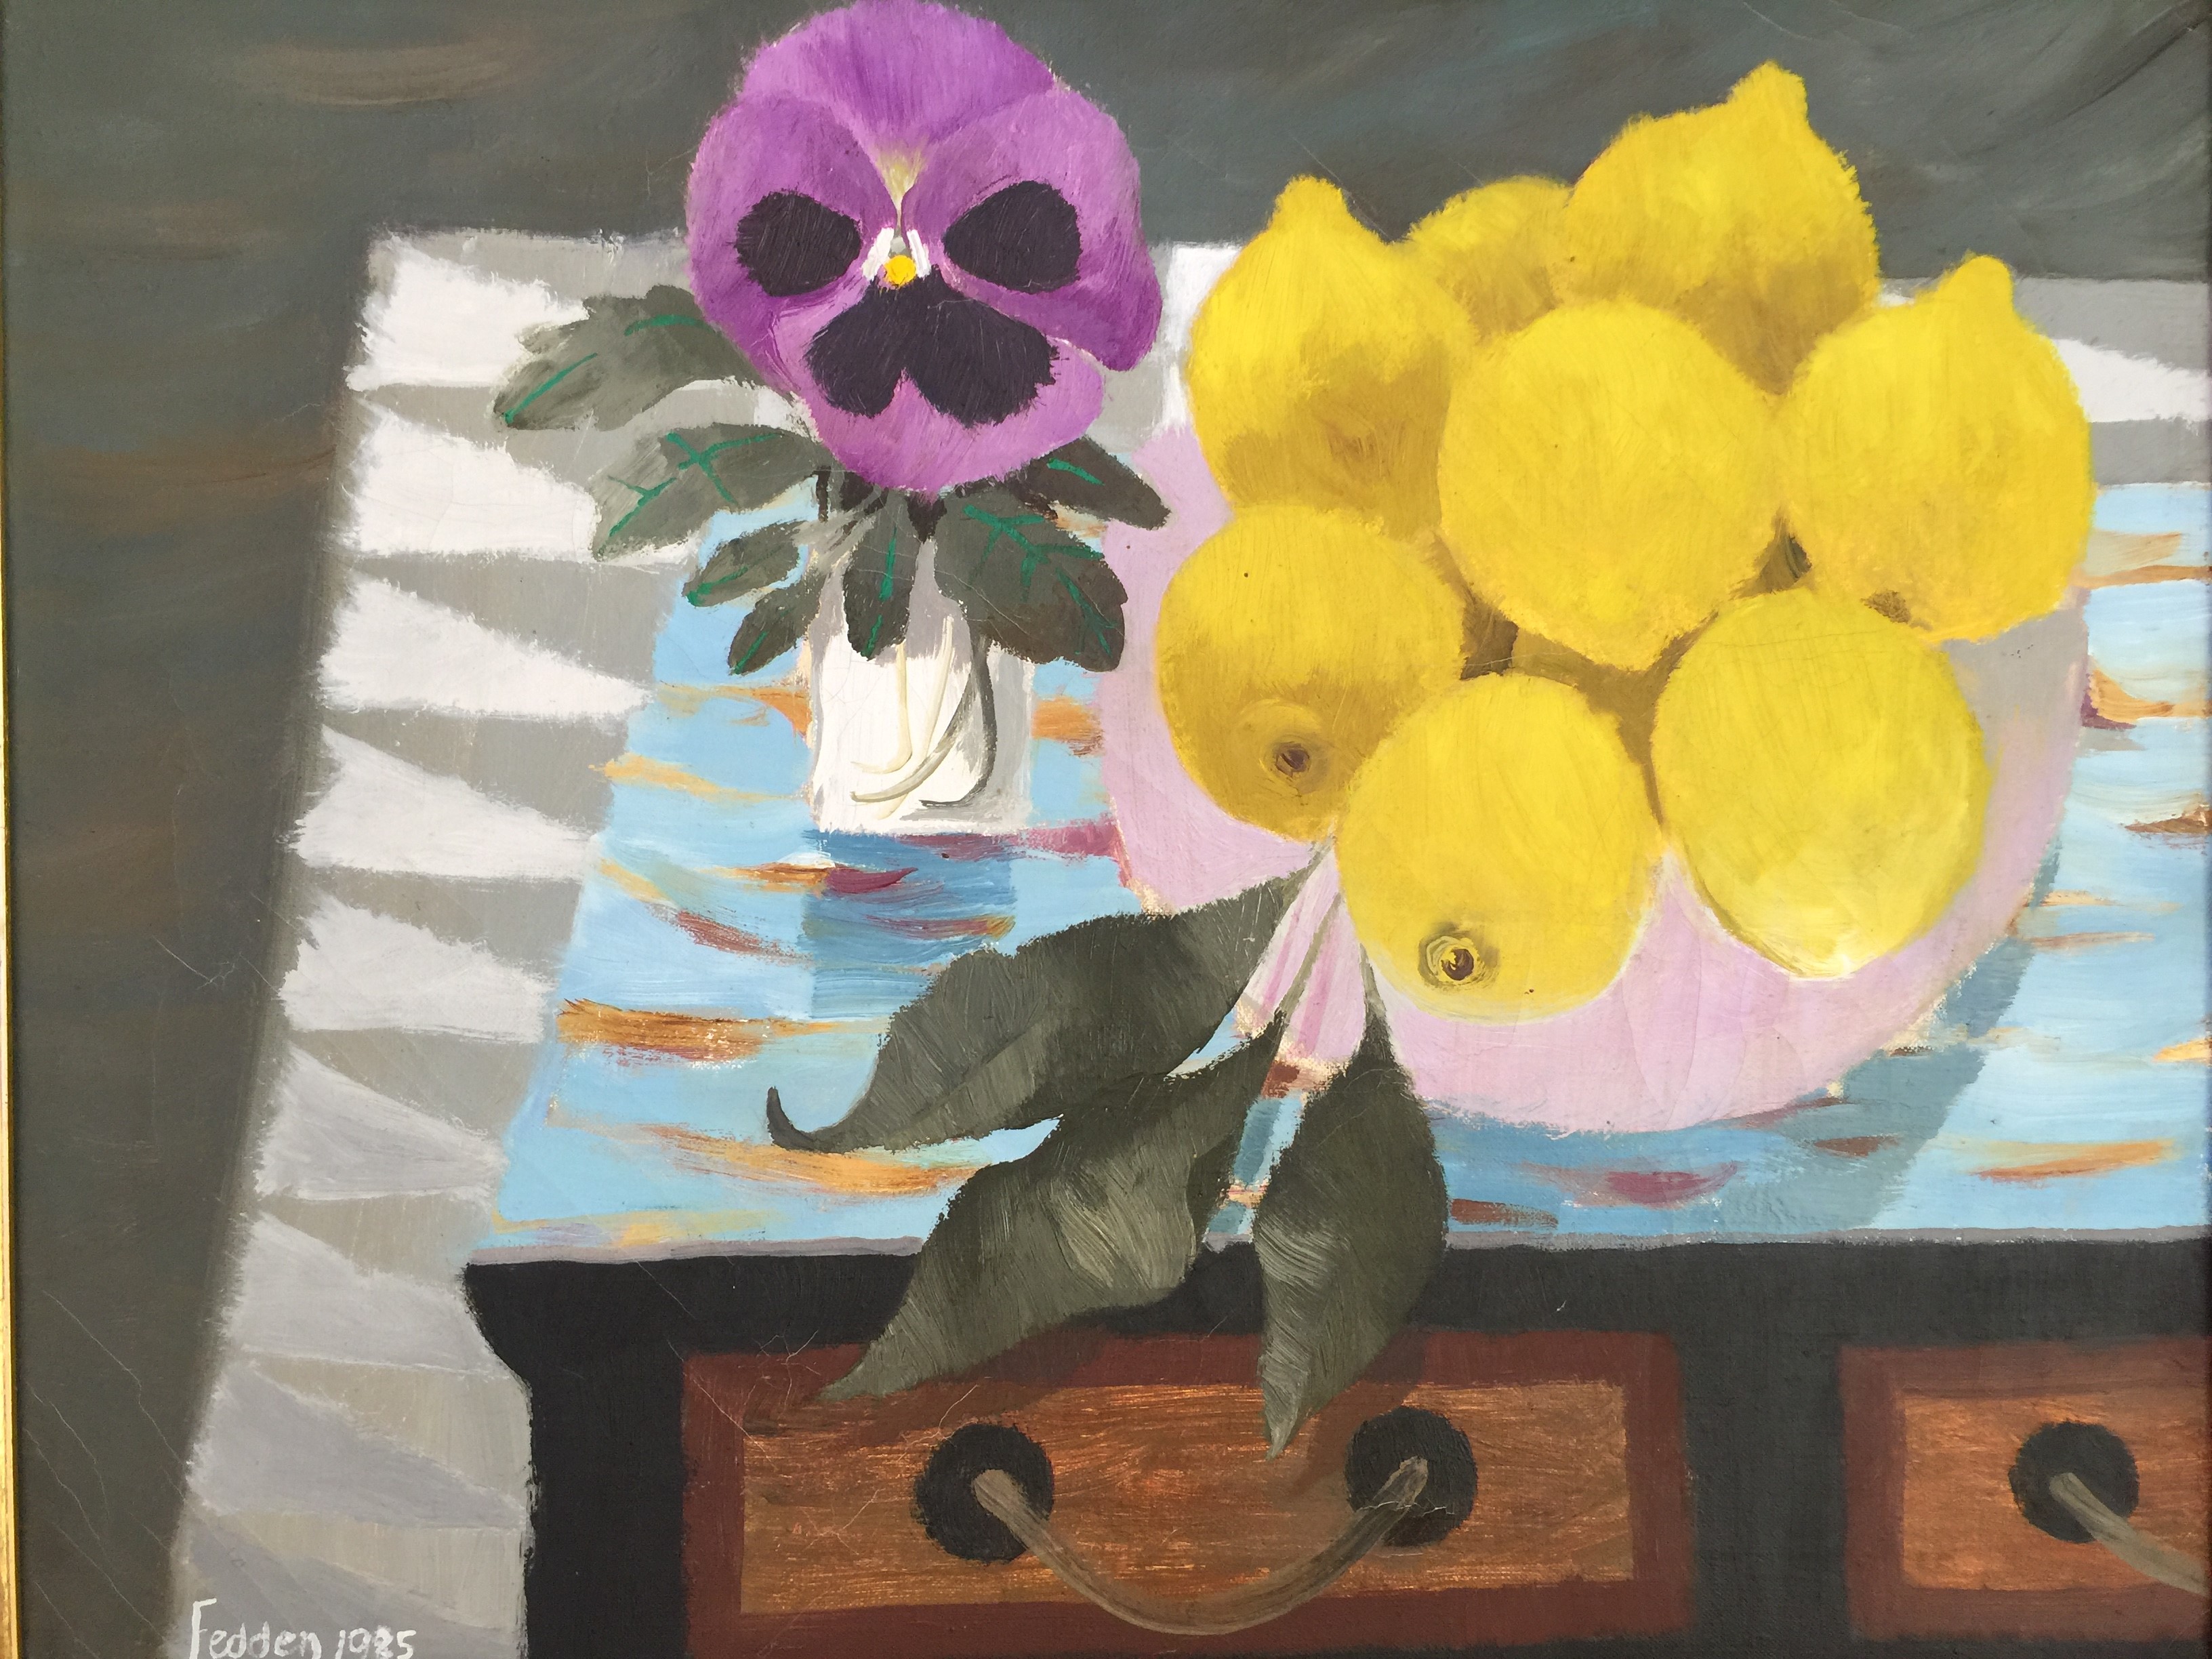 Mary Fedden, Pat's Pansy, 1985